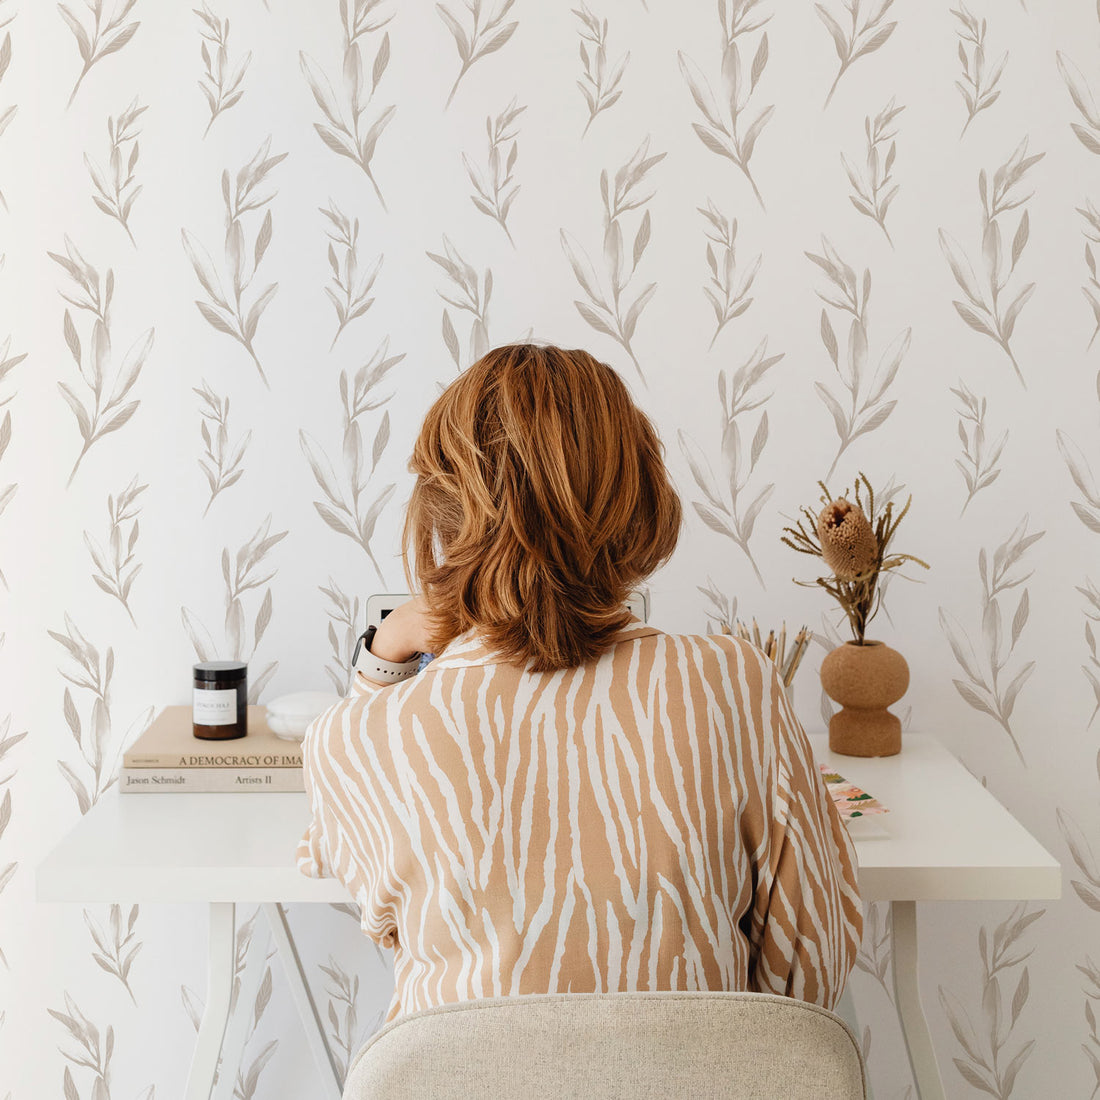 neutral color botanical foliage wallpaper for scandinavian inspired home office